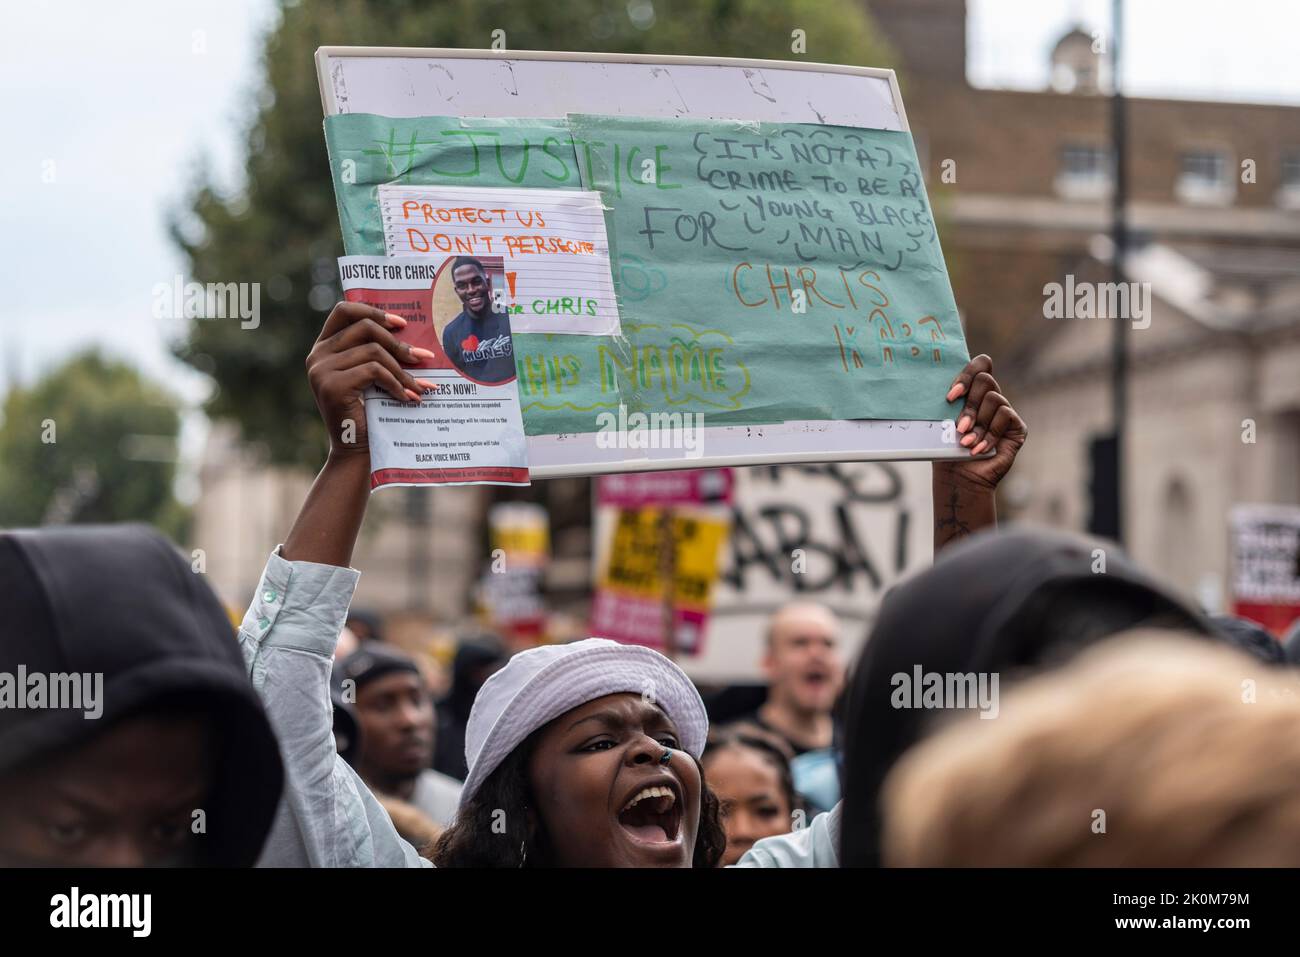 Black Lives Matter protest taking place in Whitehall prompted by the police shooting of Chris Kaba, an unarmed victim. BLM protesters shouting Stock Photo